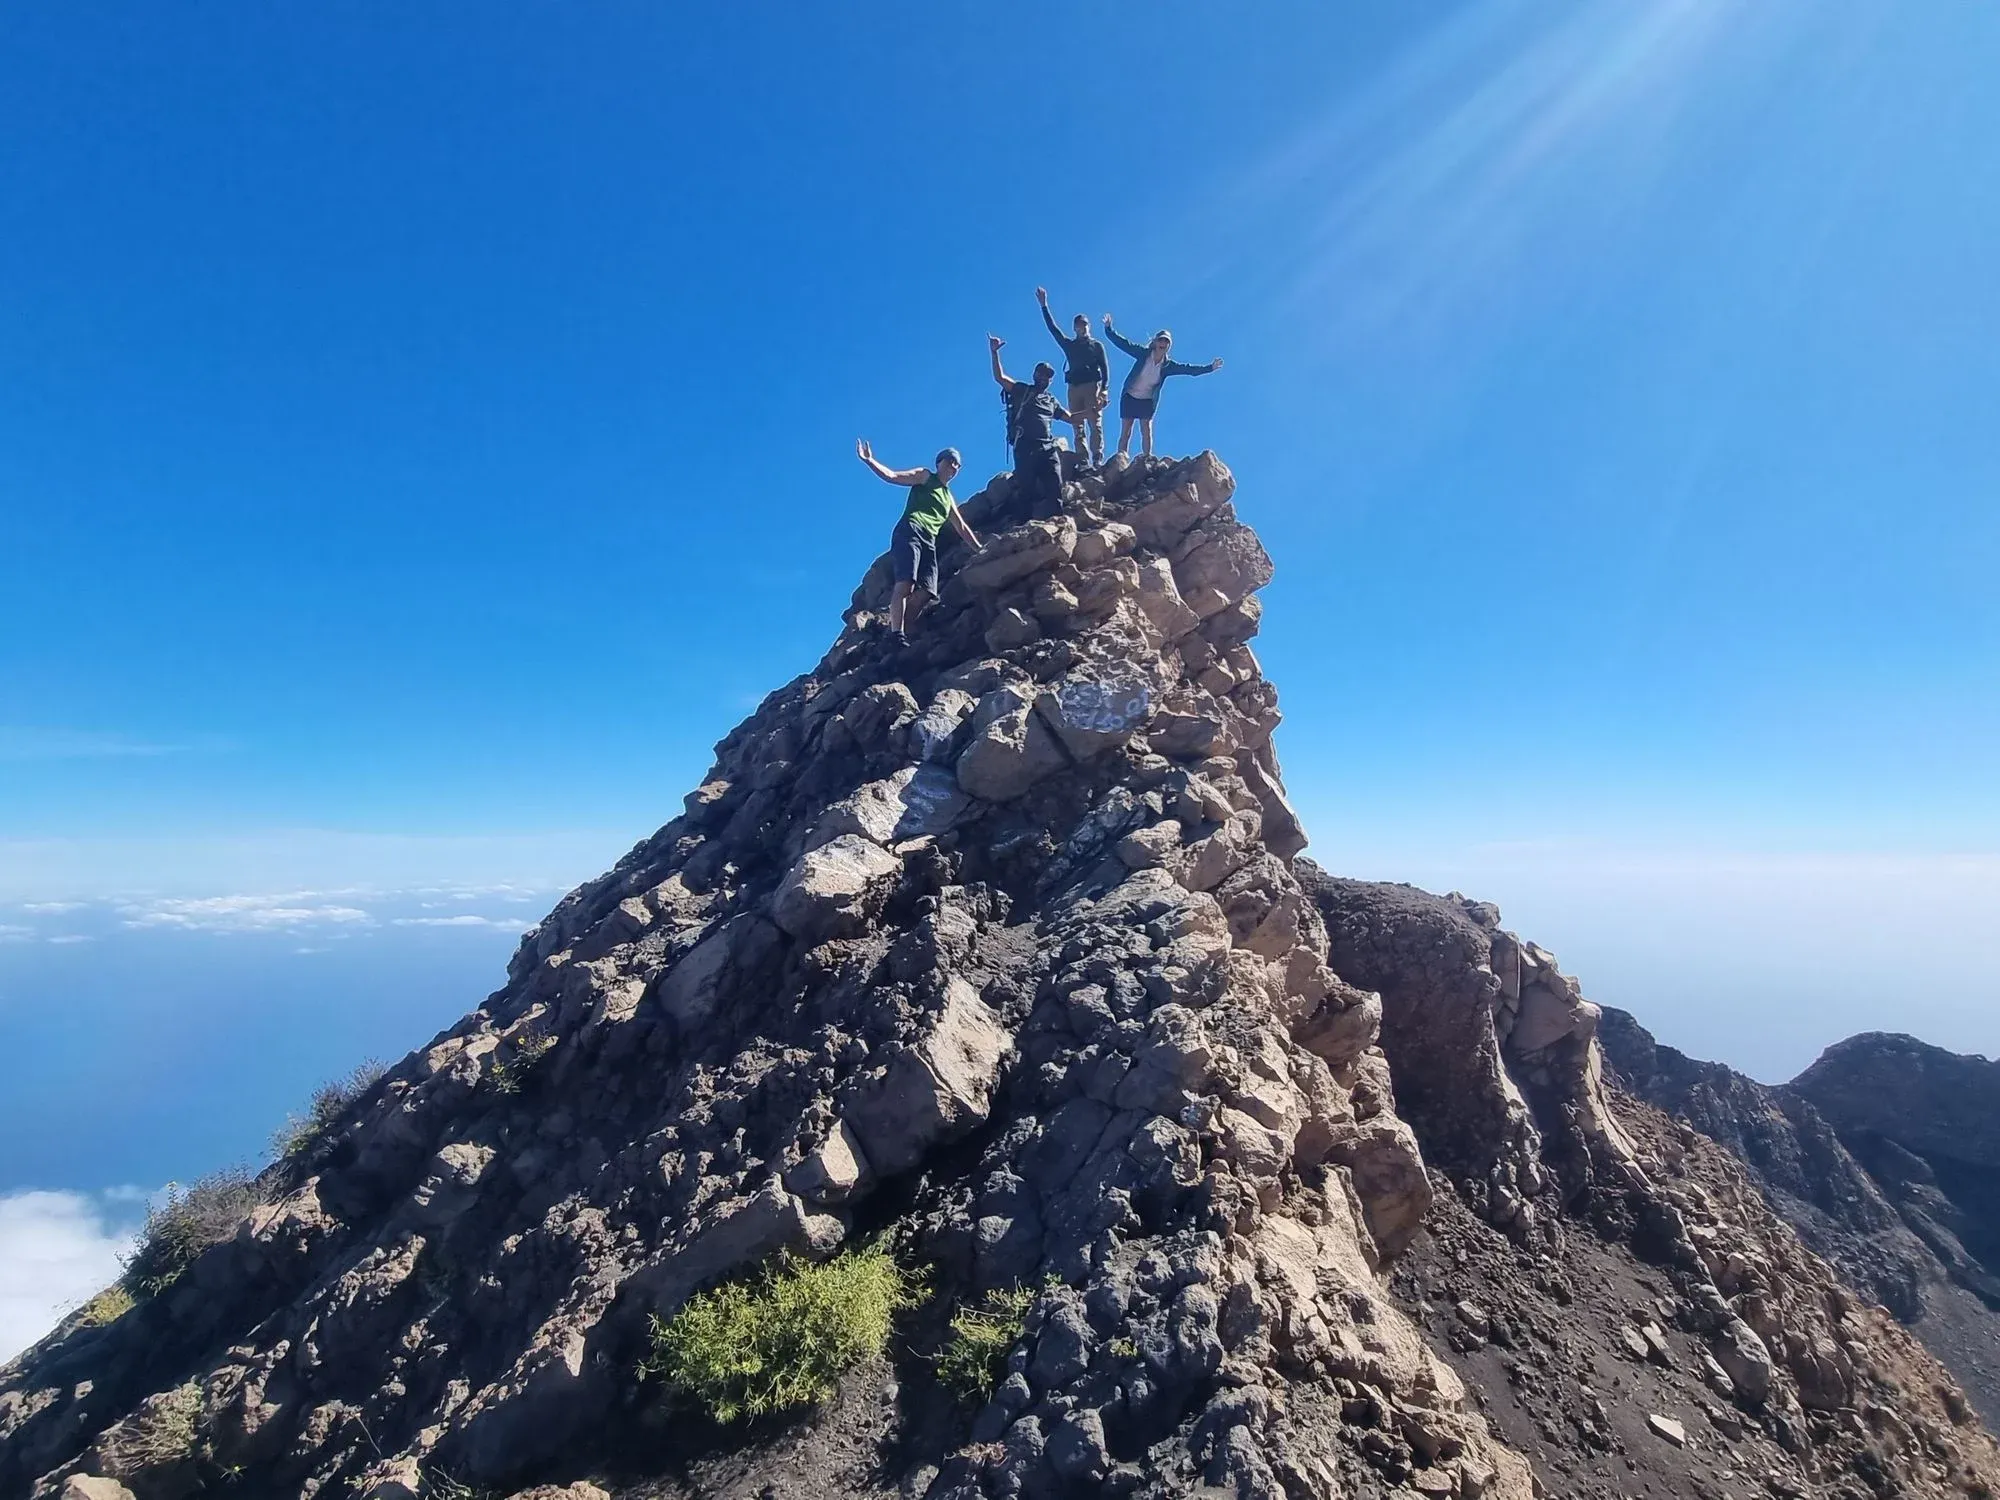 The summit of Pico do Fogo, at the very top of Cape Verde. Photo: Marta Marinelli